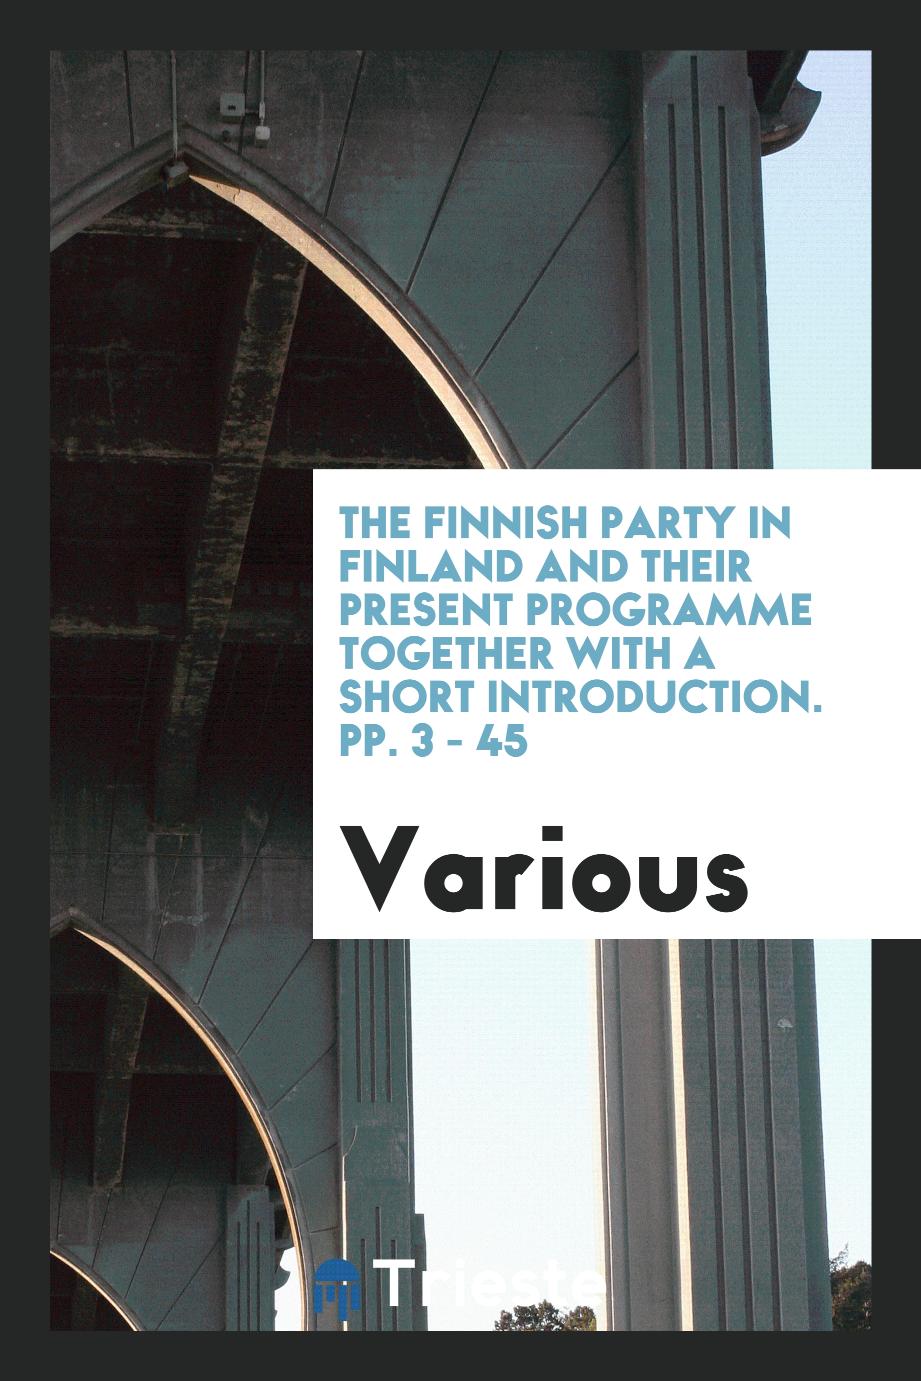 The Finnish Party in Finland and Their Present Programme together with a short introduction. pp. 3 - 45